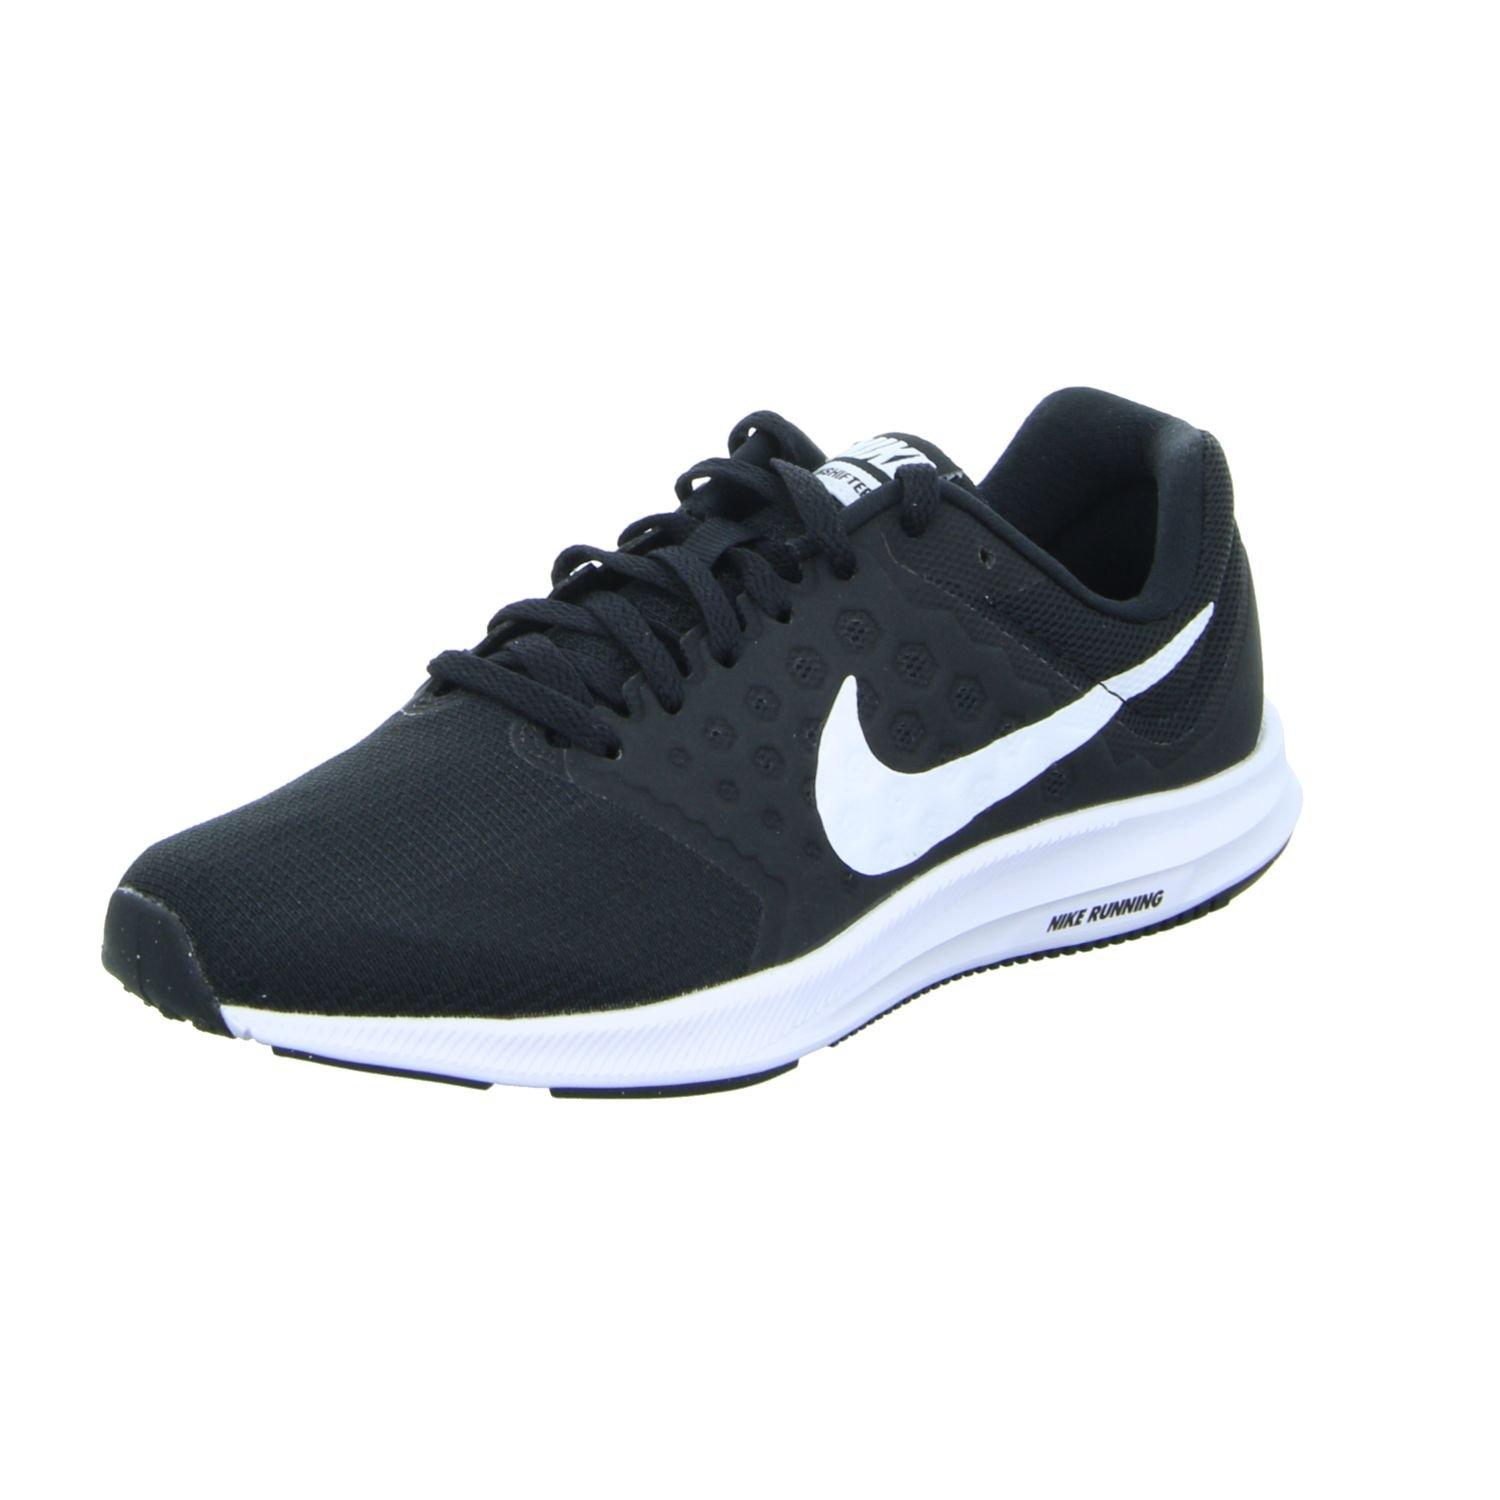 Nike Synthetic Downshifter 7 Running Shoes in Black Black White (Black) -  Save 48% | Lyst UK